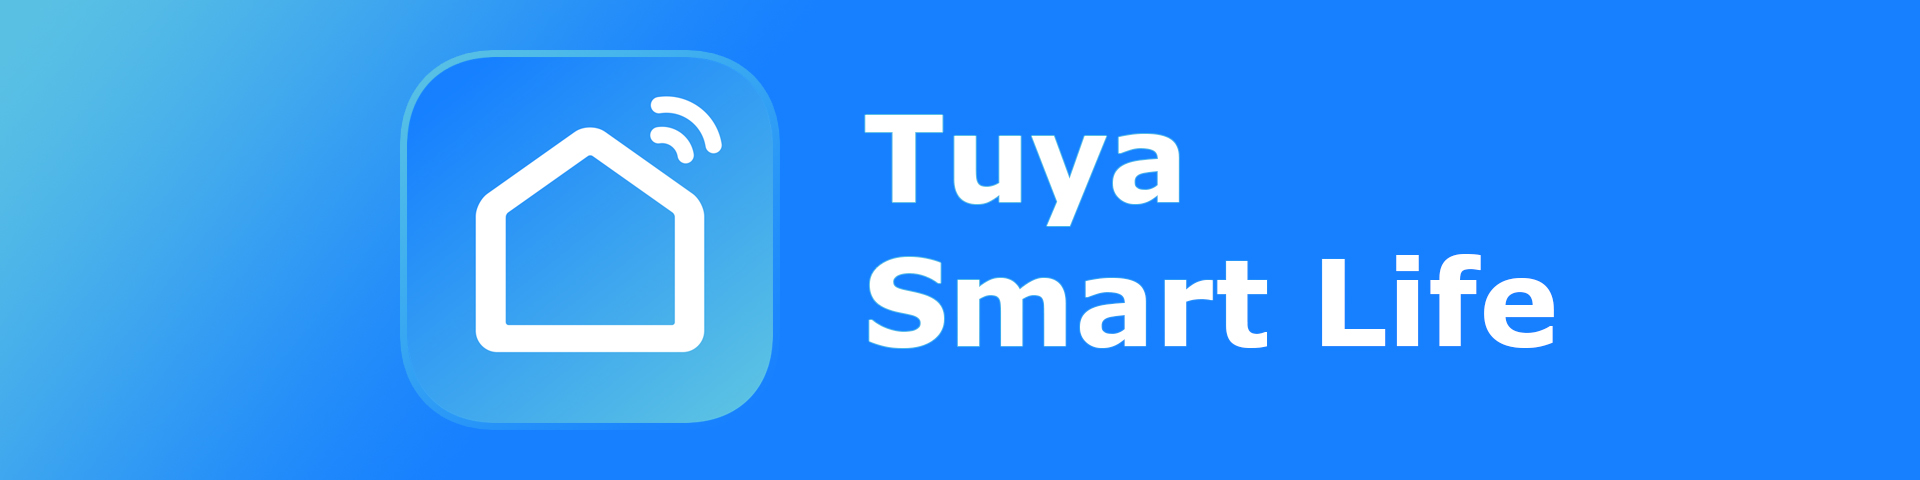 Control smart devices with Tuya Smart Life